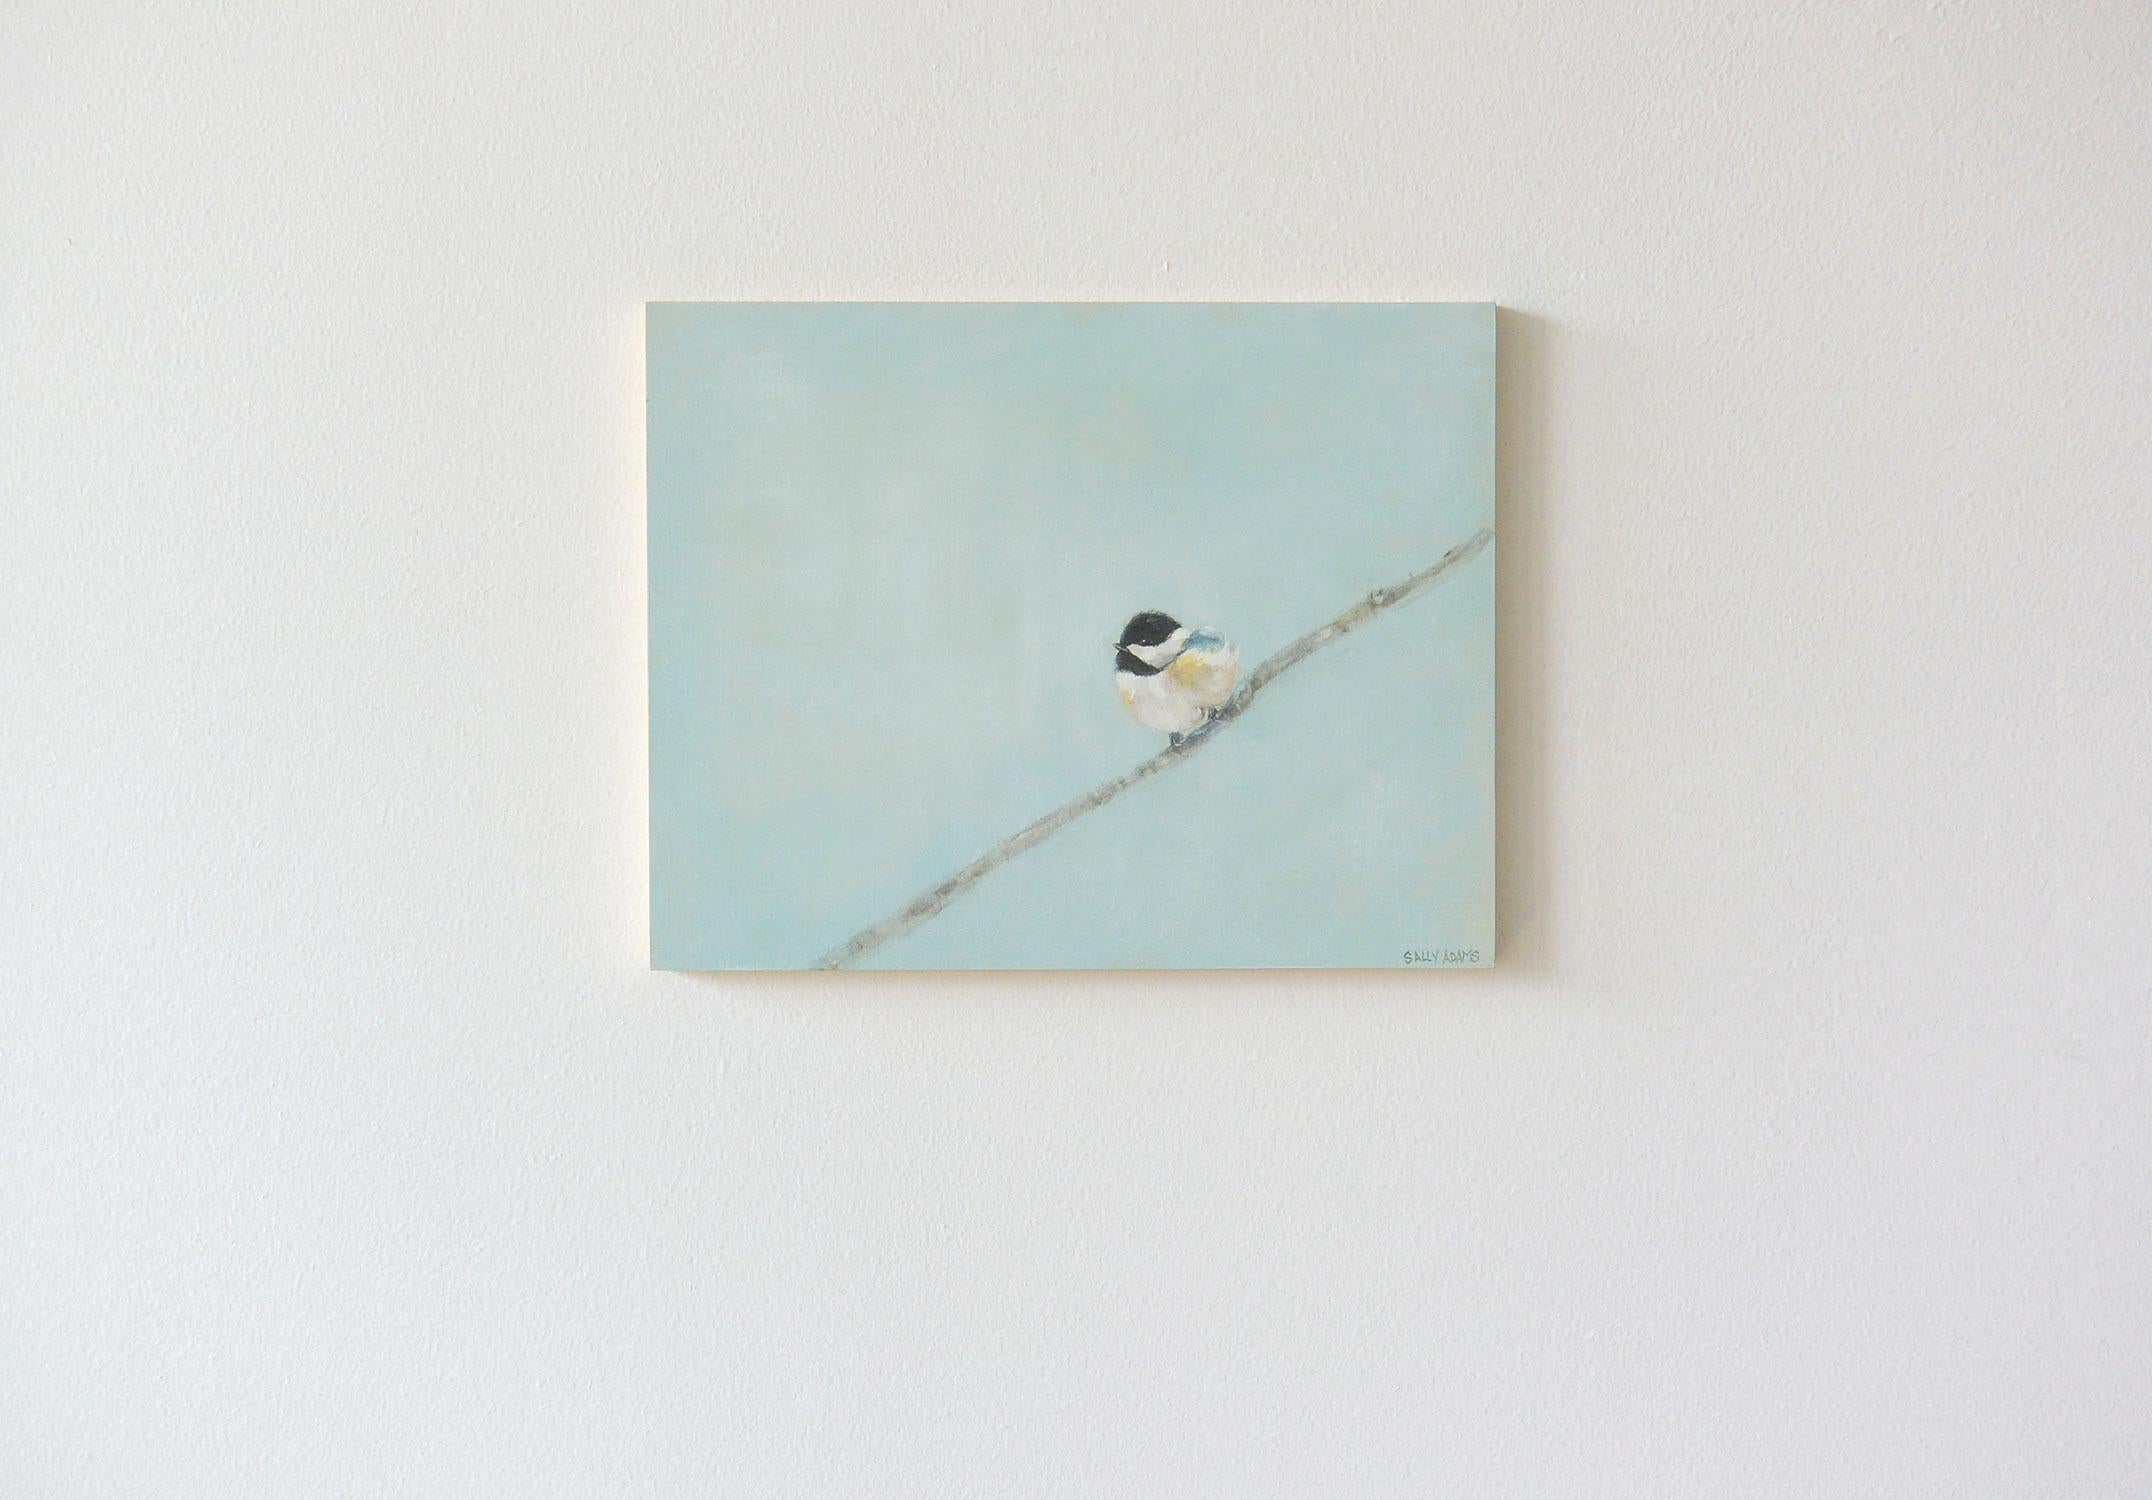 <p>Artist Comments<br />Part of a series of small scale works illustrating the birds near Sally's home. She says this baby chickadee was all tucked in, keeping warm on a spare branch. Sally focused on the soft features of the bird highlighted